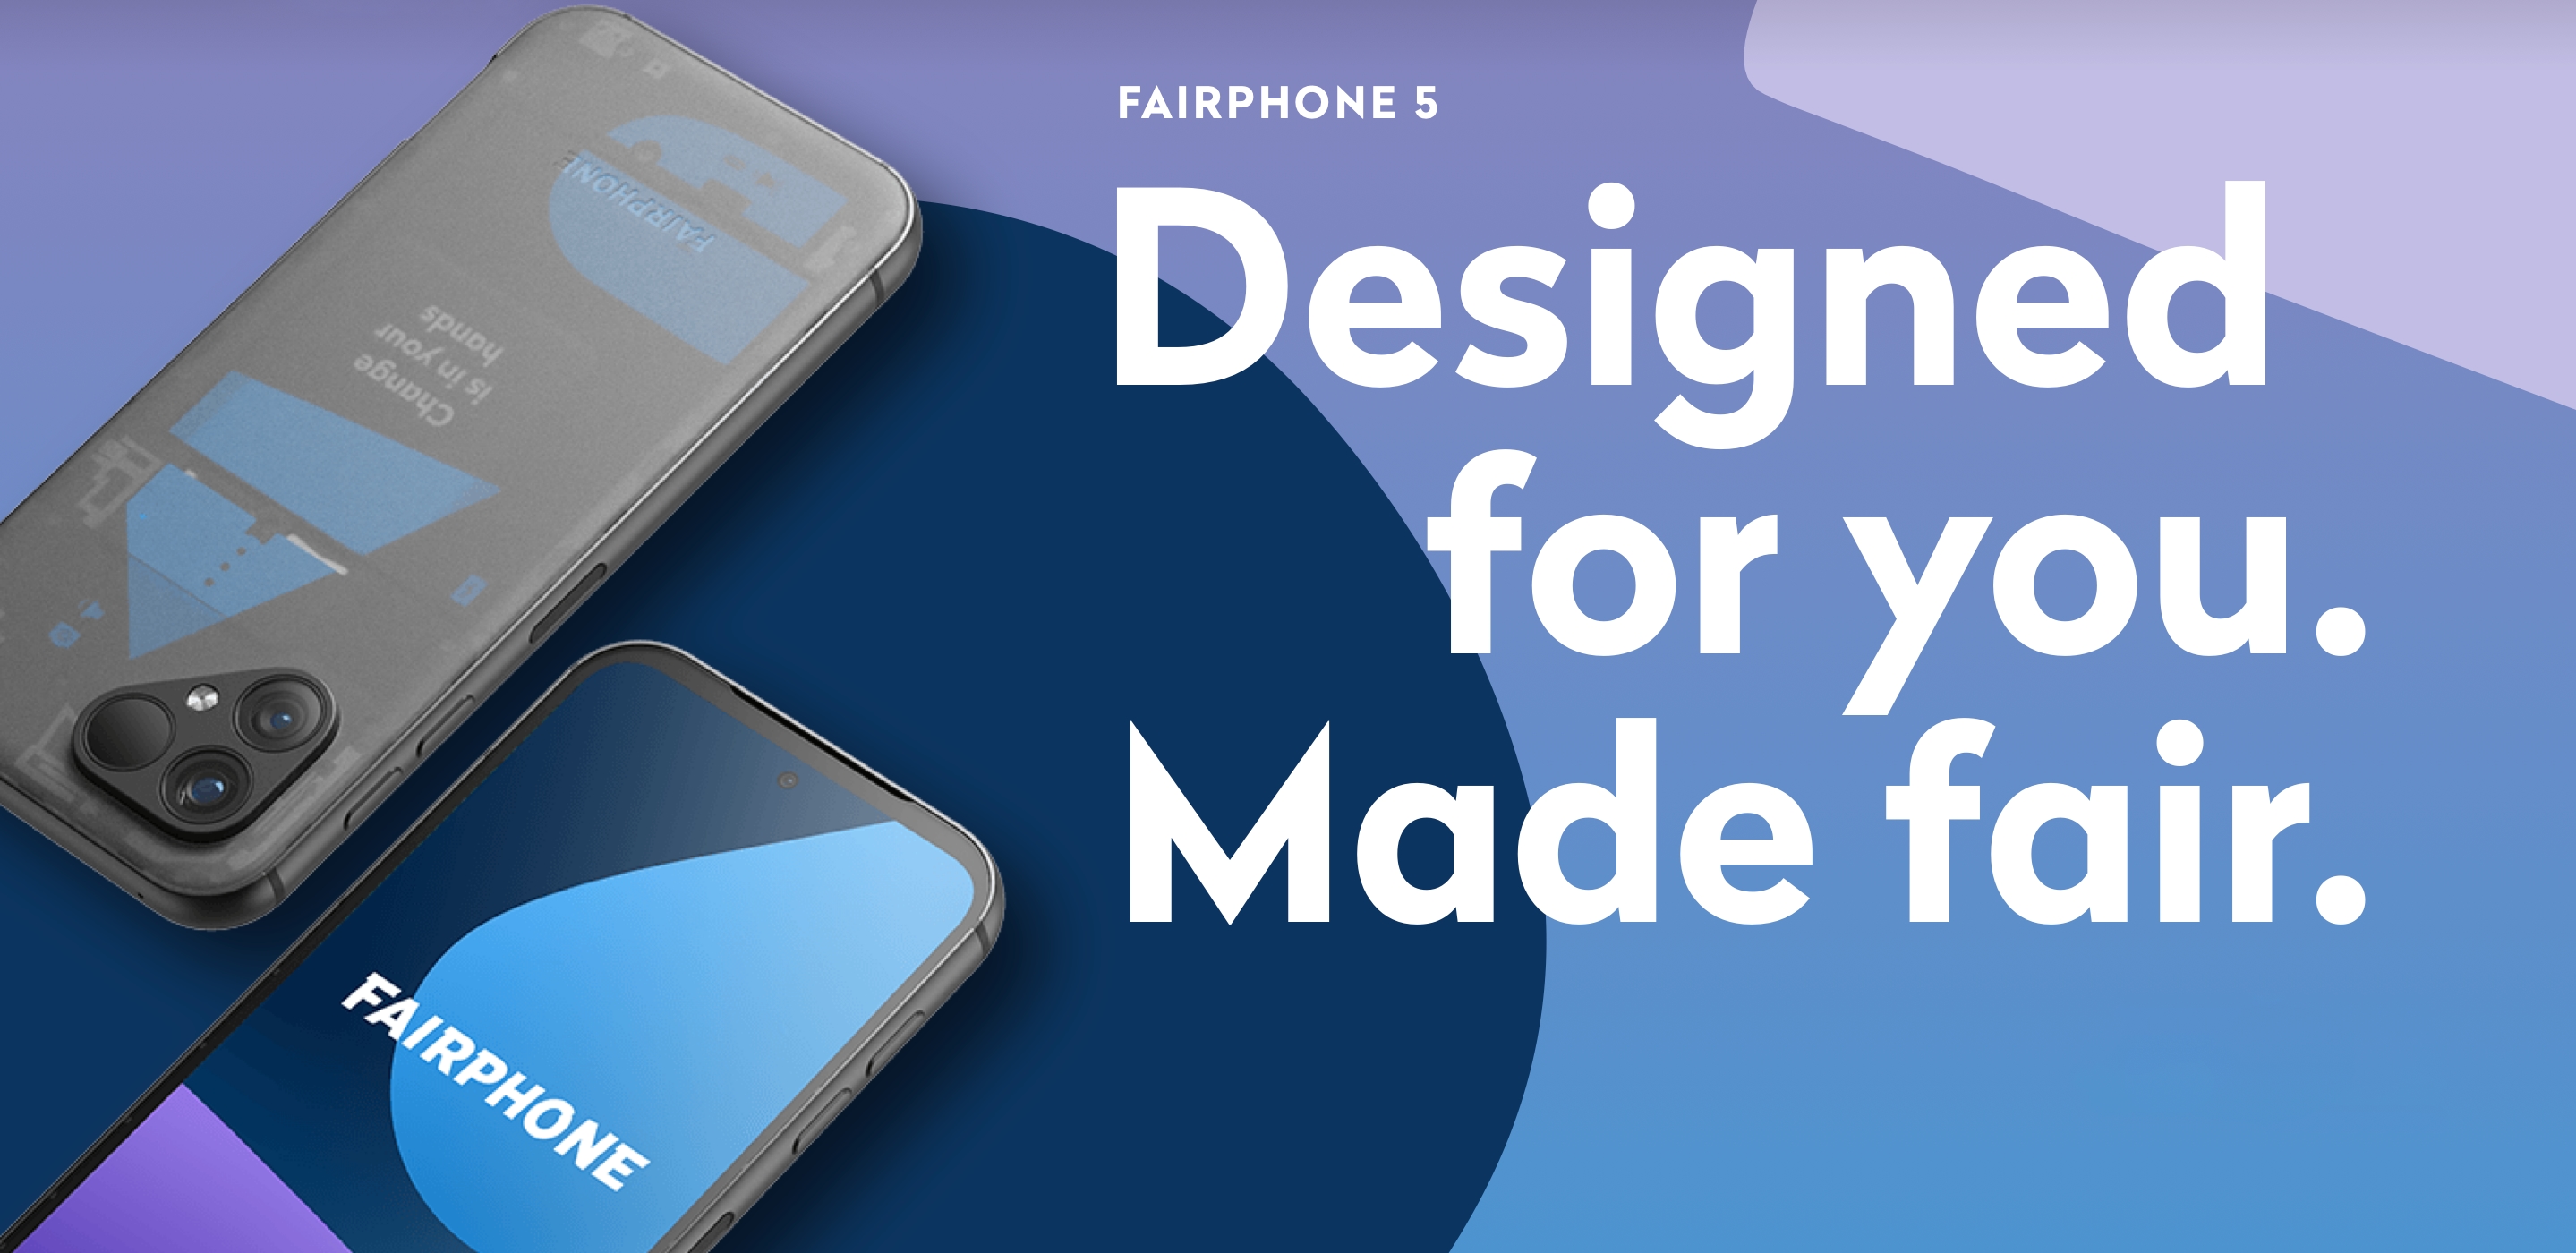 Fairphone 5: a smartphone builder with a five-year warranty and support for up to 10 years for €699